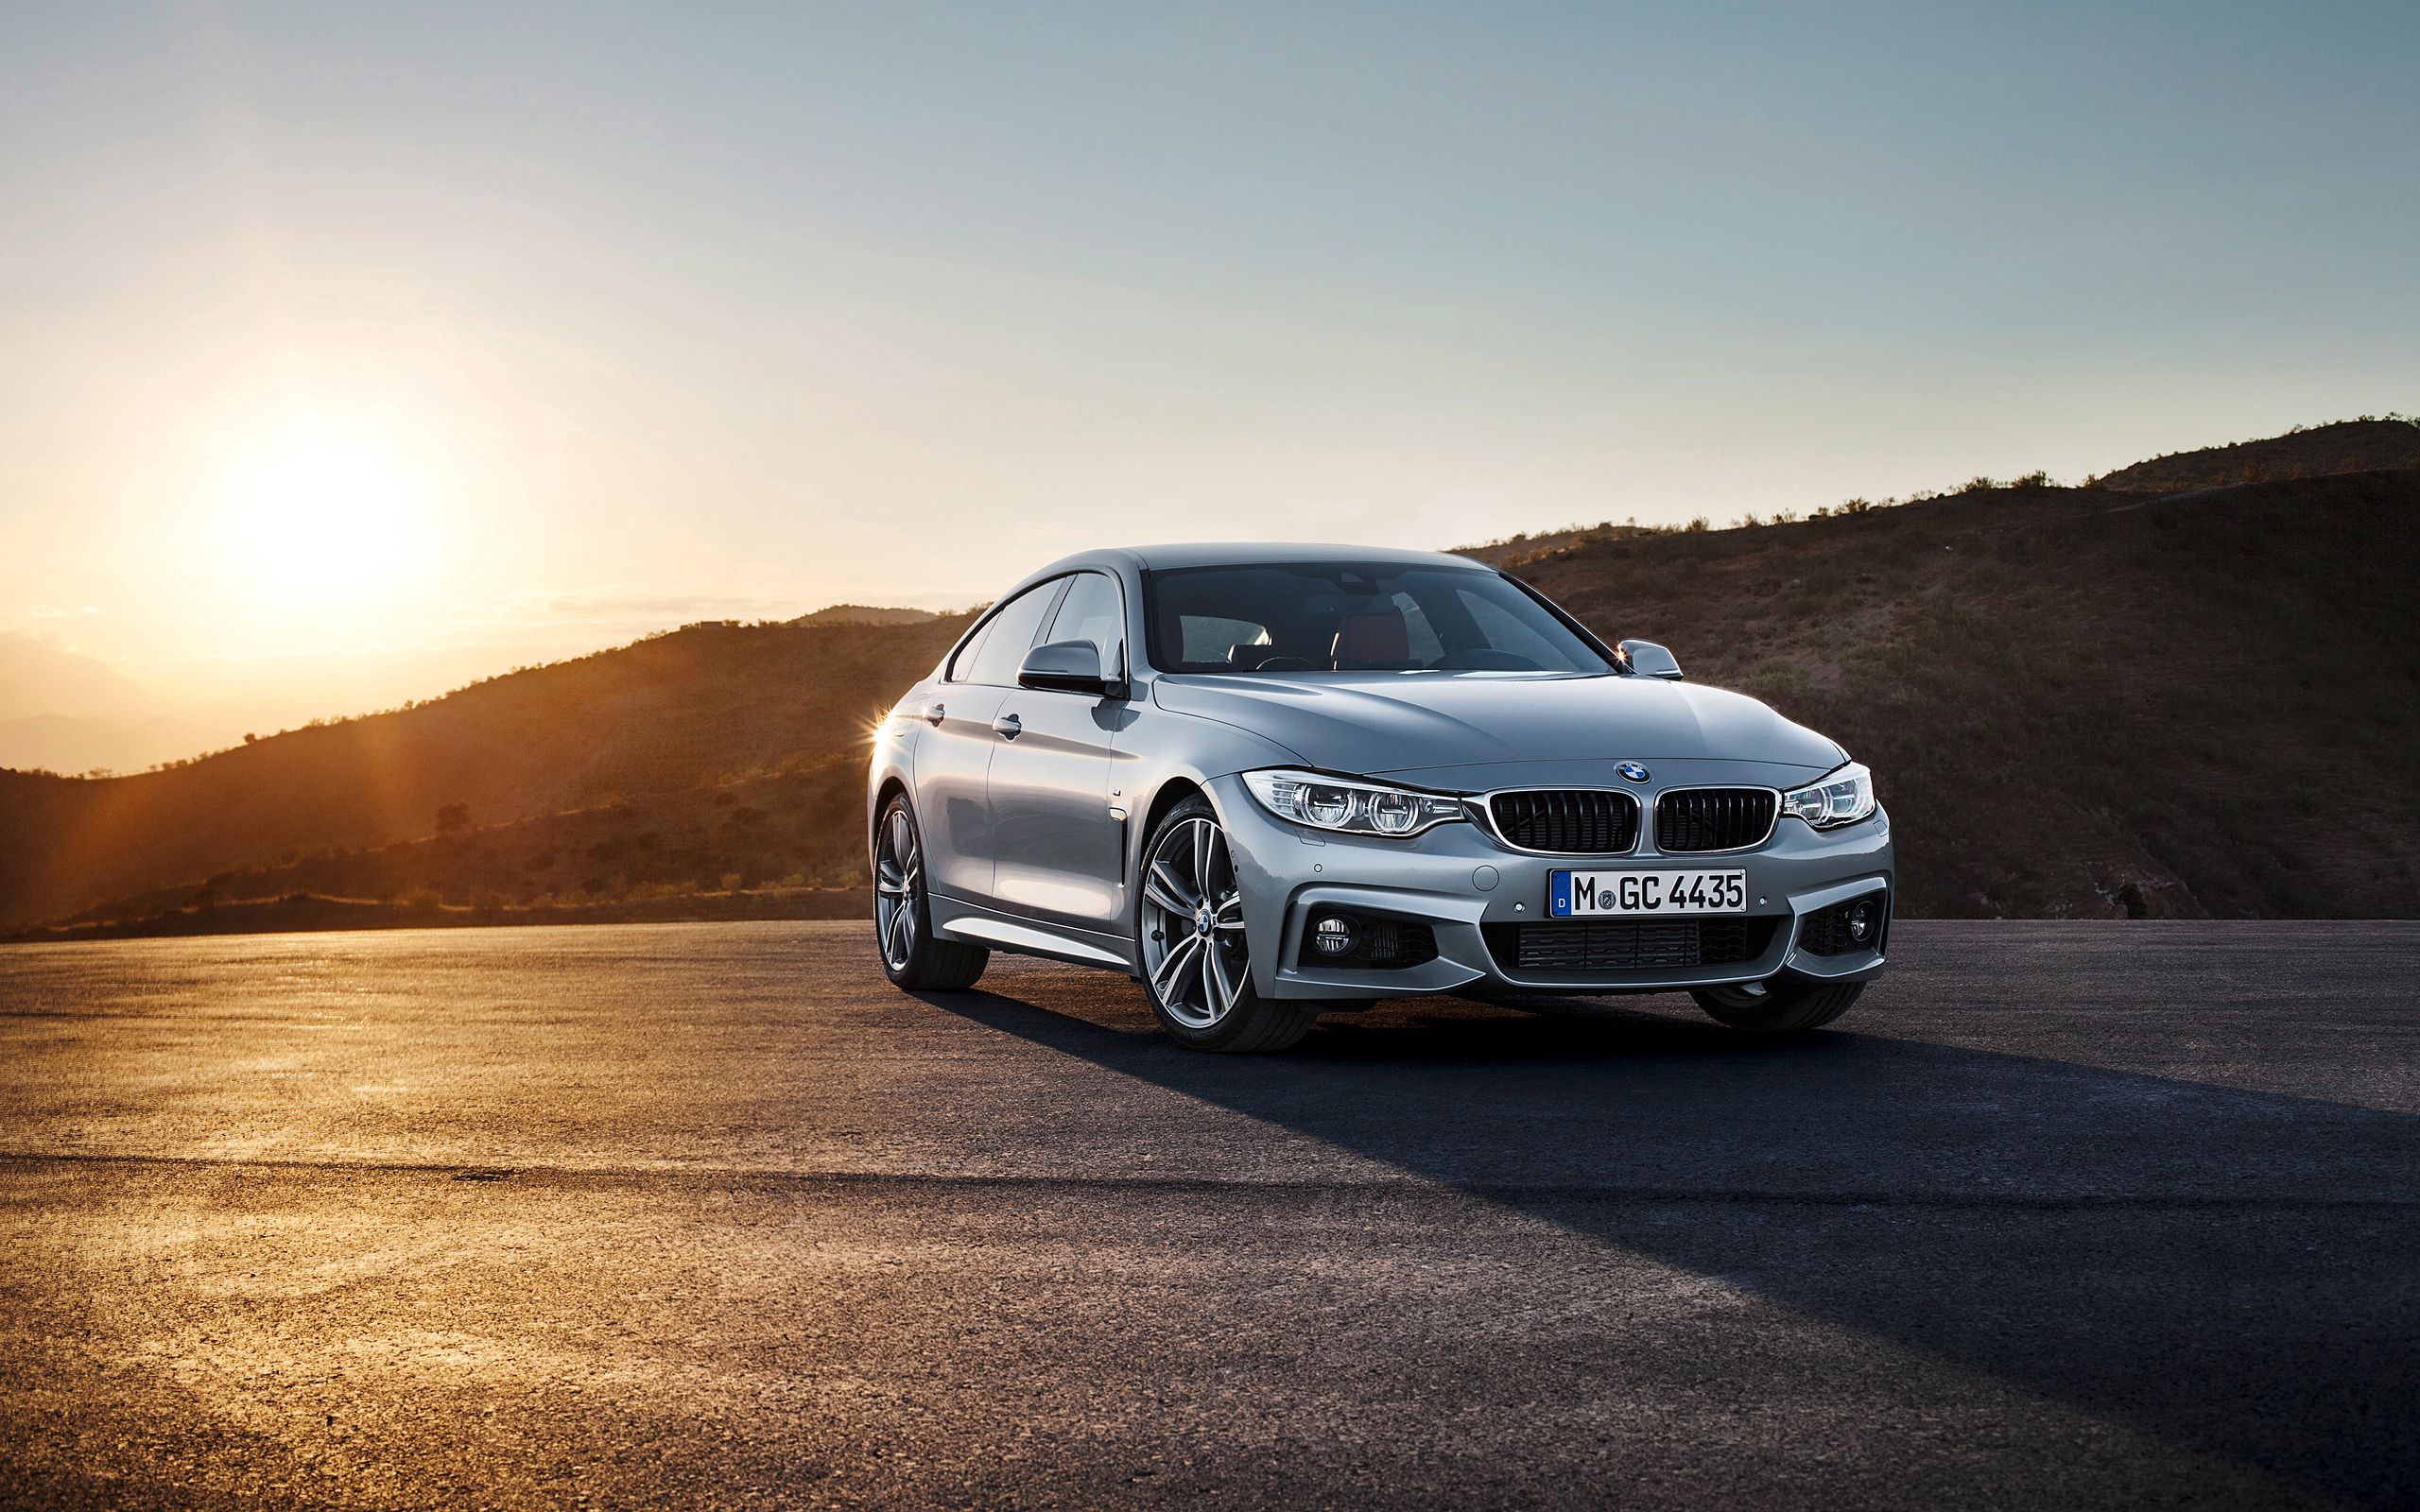 bmw, cars, gran coupe, 4 series Image for desktop